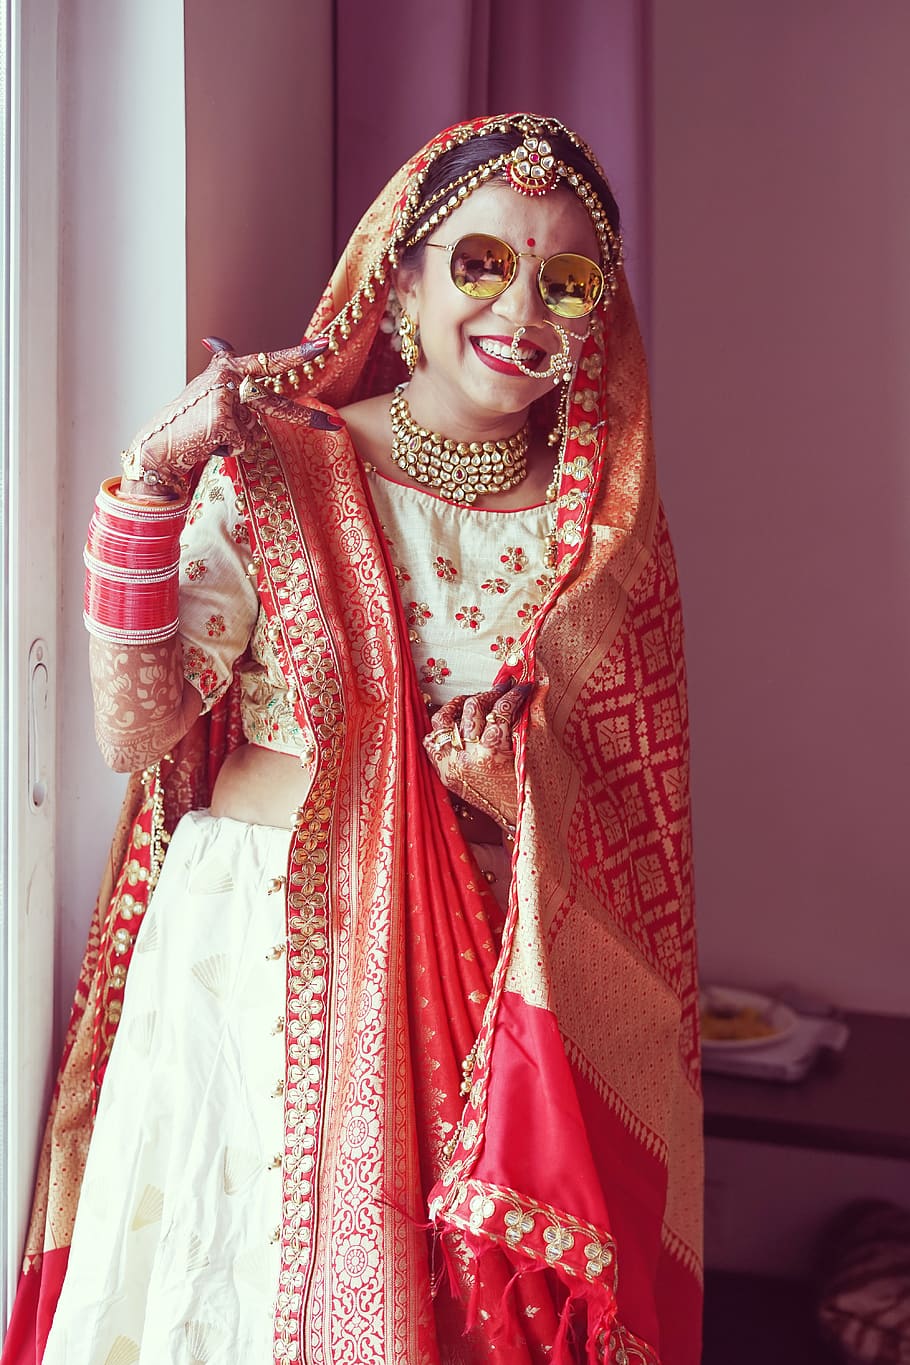 HD wallpaper: bride, indian, swaag, looks, traditional clothing